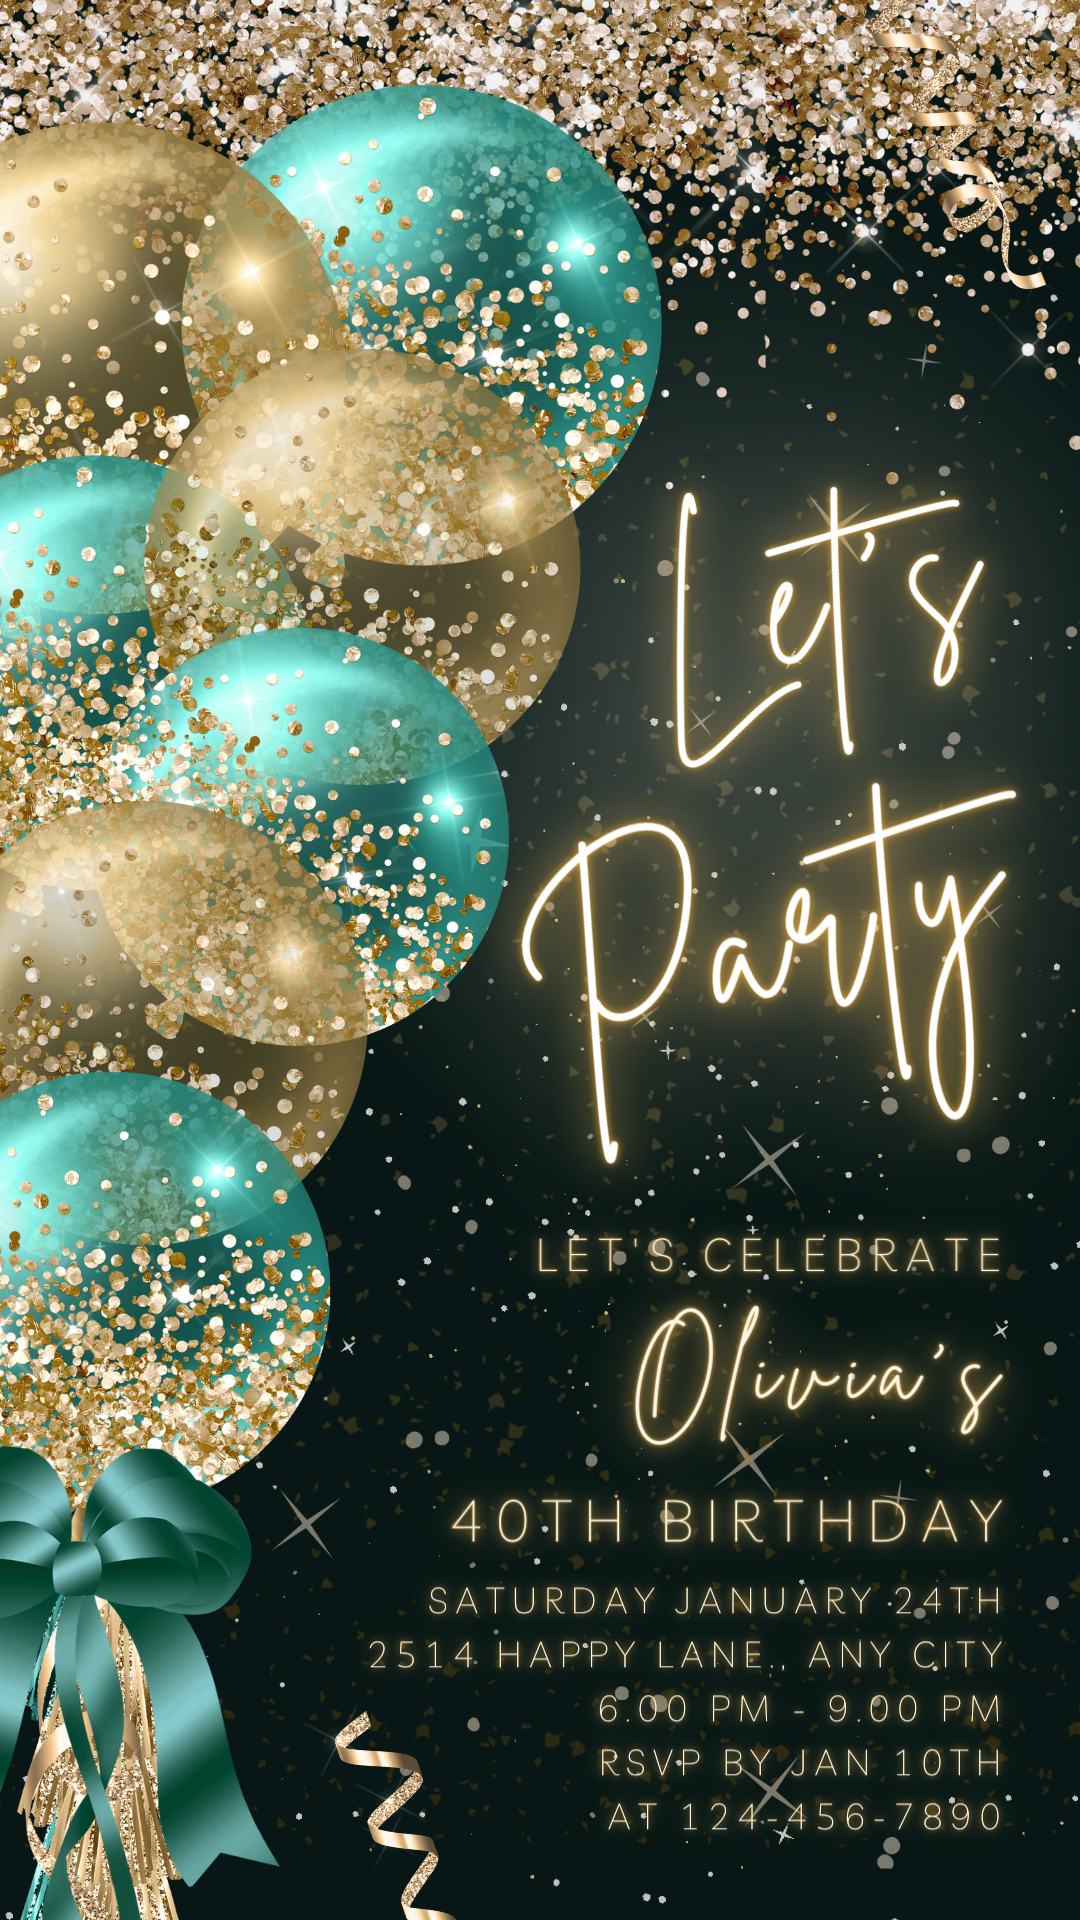 Animated Let's Party invitation, Green Glittery Dance Night Invite for any Event Celebration, Editable Video Birthday Template